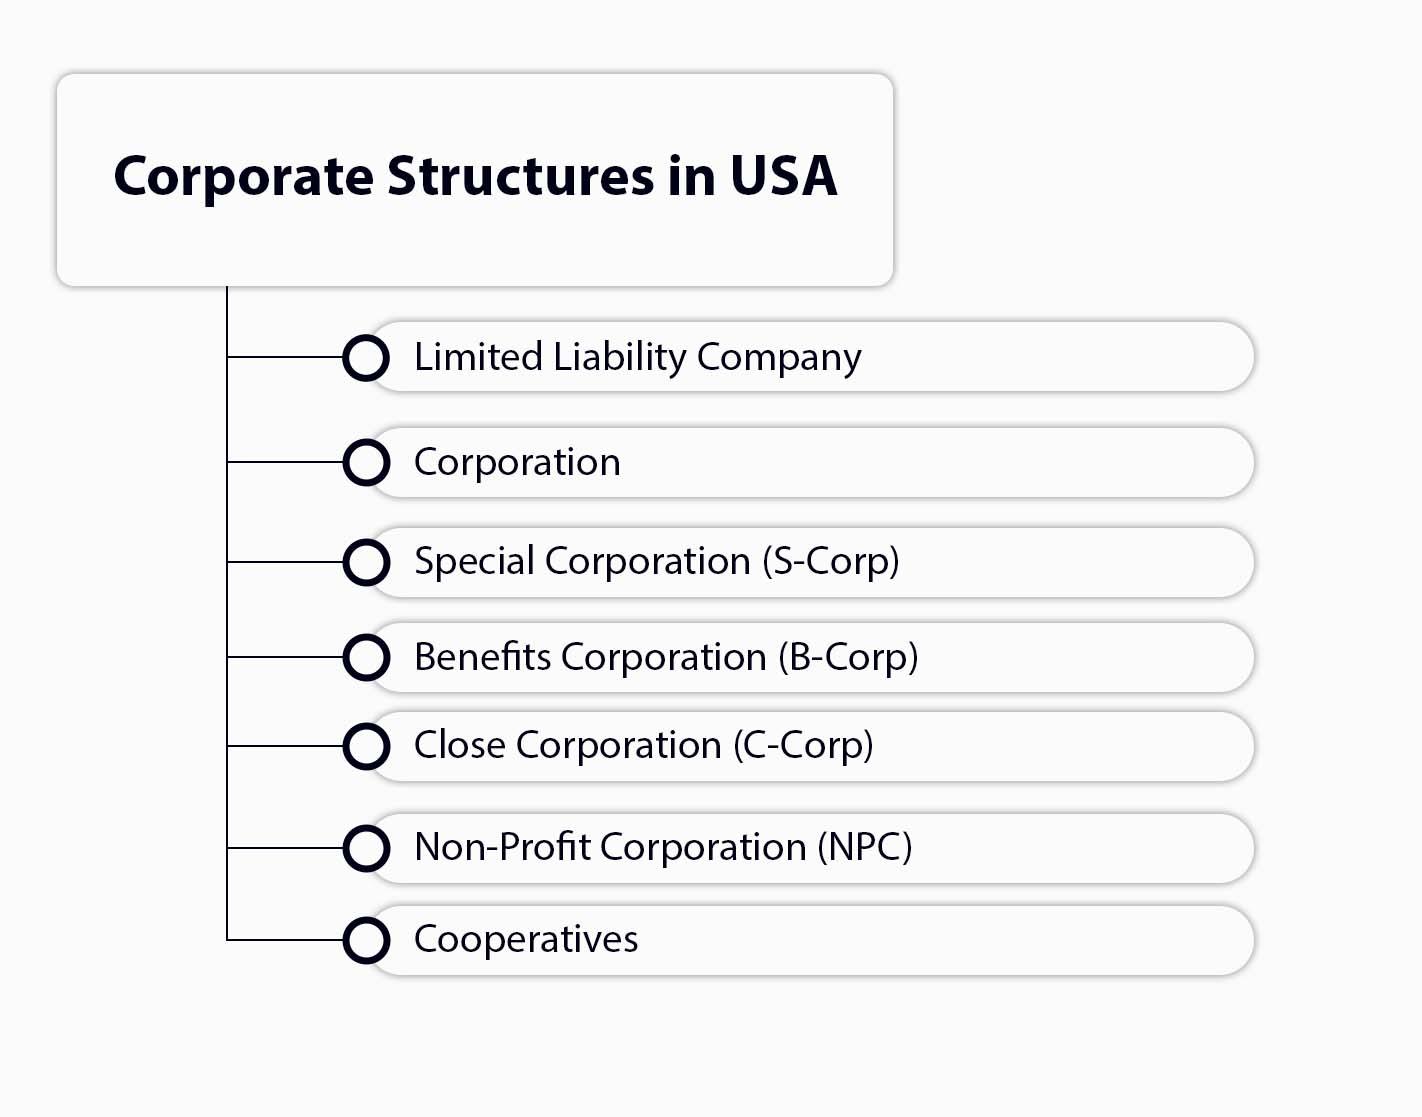 List of of different business structures in the USA